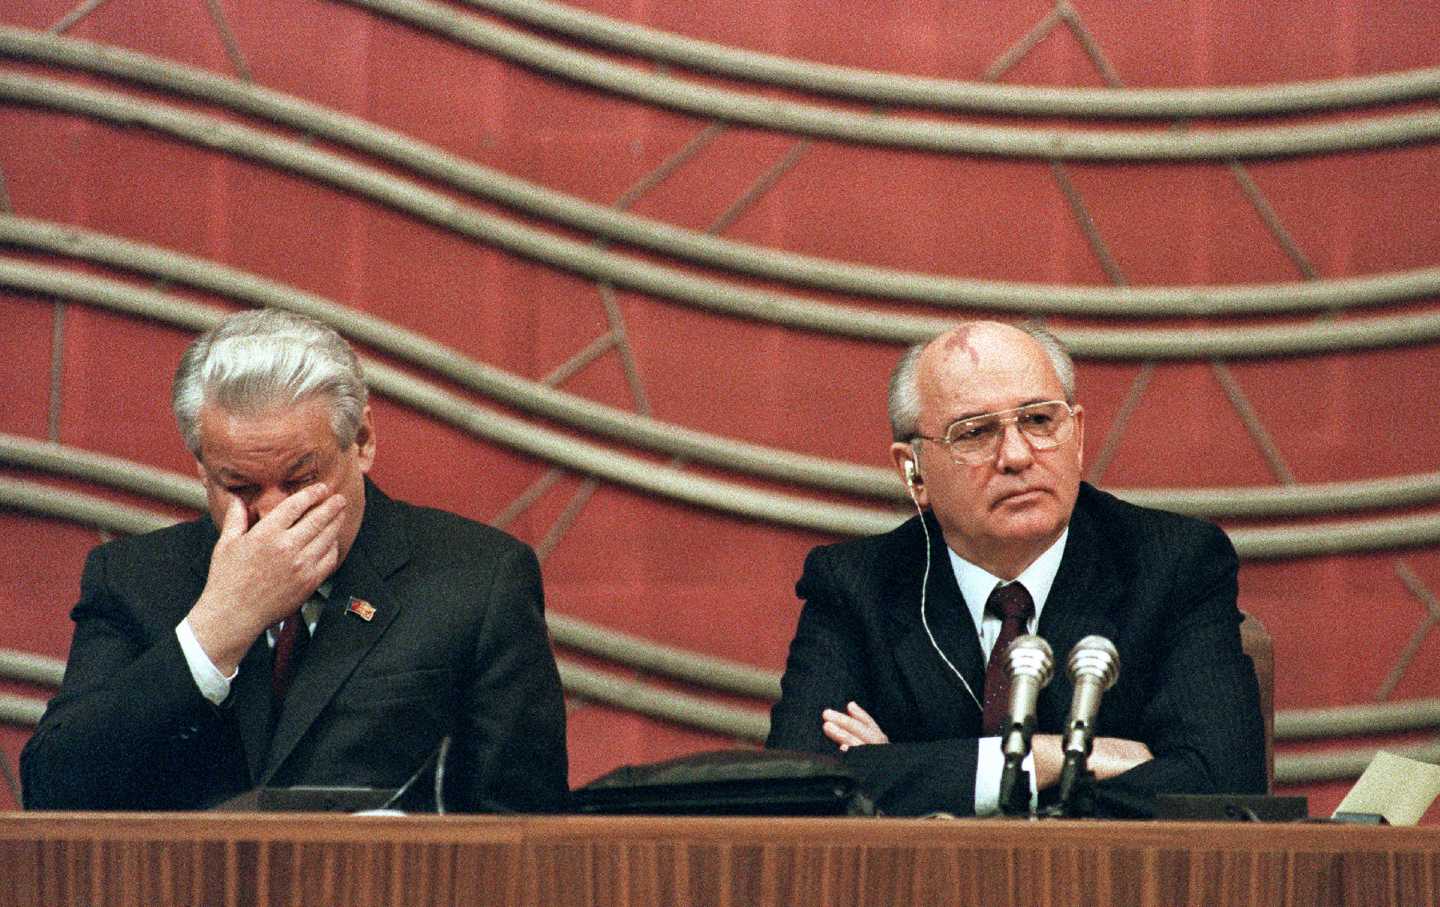 President of the Russian Federation Boris Yeltsin and Soviet President Mikhail Gorbachev during the opening of the Congress of People's Deputies of the USSR in Moscow on December 17, 1990.